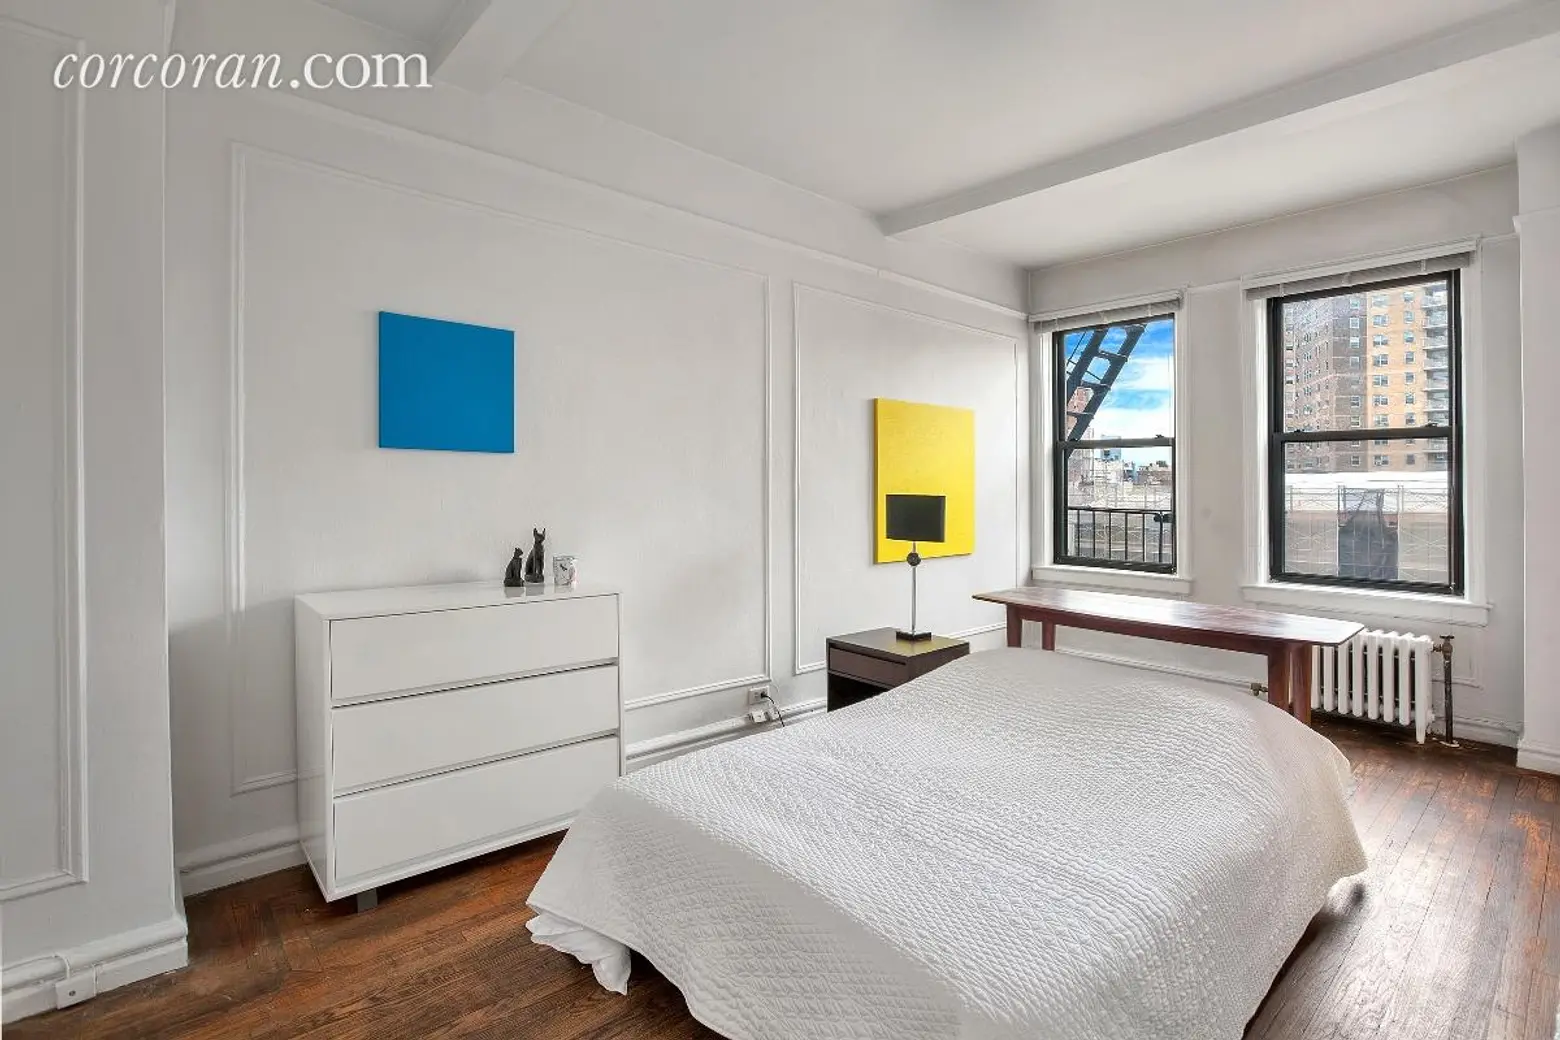 172 East 4th Street, Ageloff Tower, East Village co-op, Justin Chambers